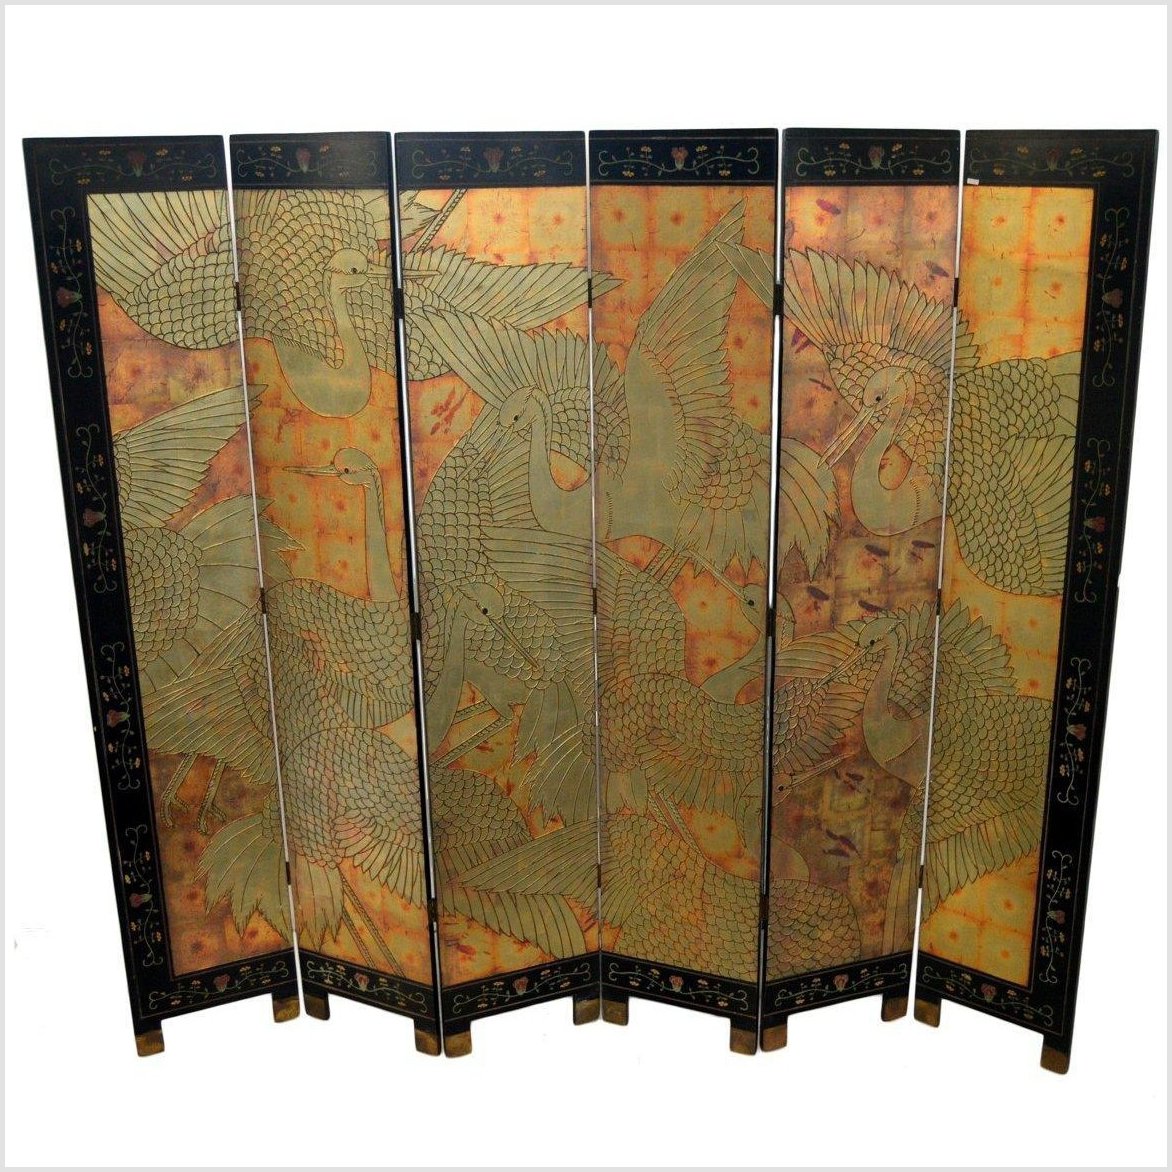 6-Panel Screen Depicting Cranes in Gold, Jade and Black Tones-YN2789-1. Asian & Chinese Furniture, Art, Antiques, Vintage Home Décor for sale at FEA Home